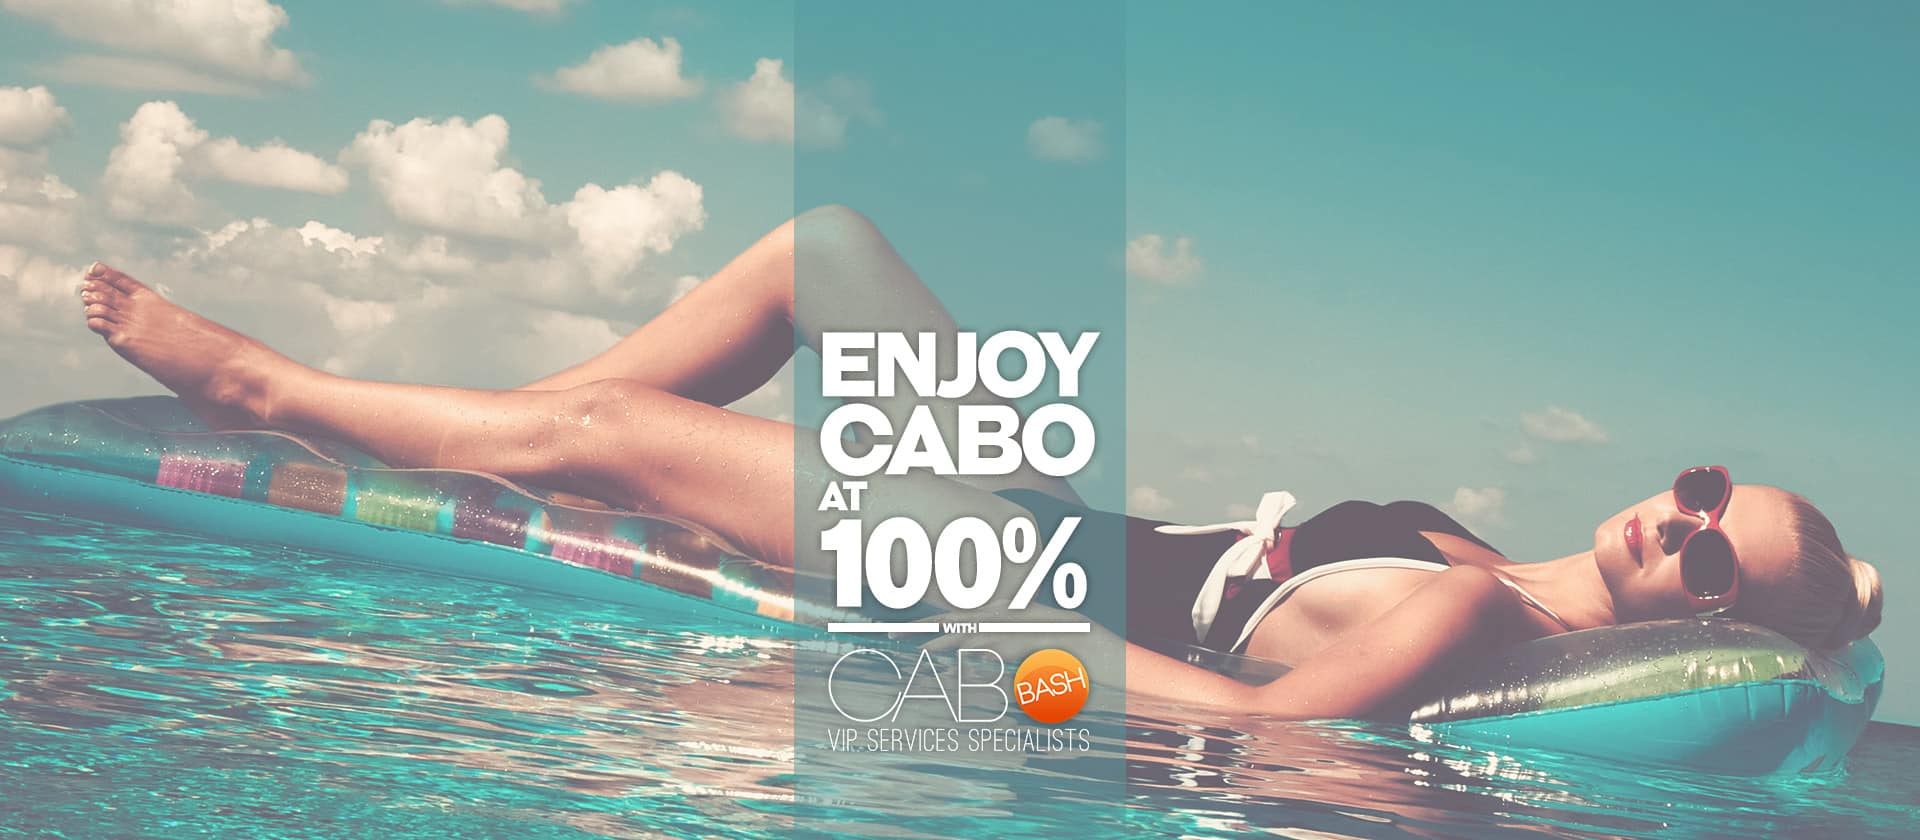 live the dream like a rockstar with cabobash vip services